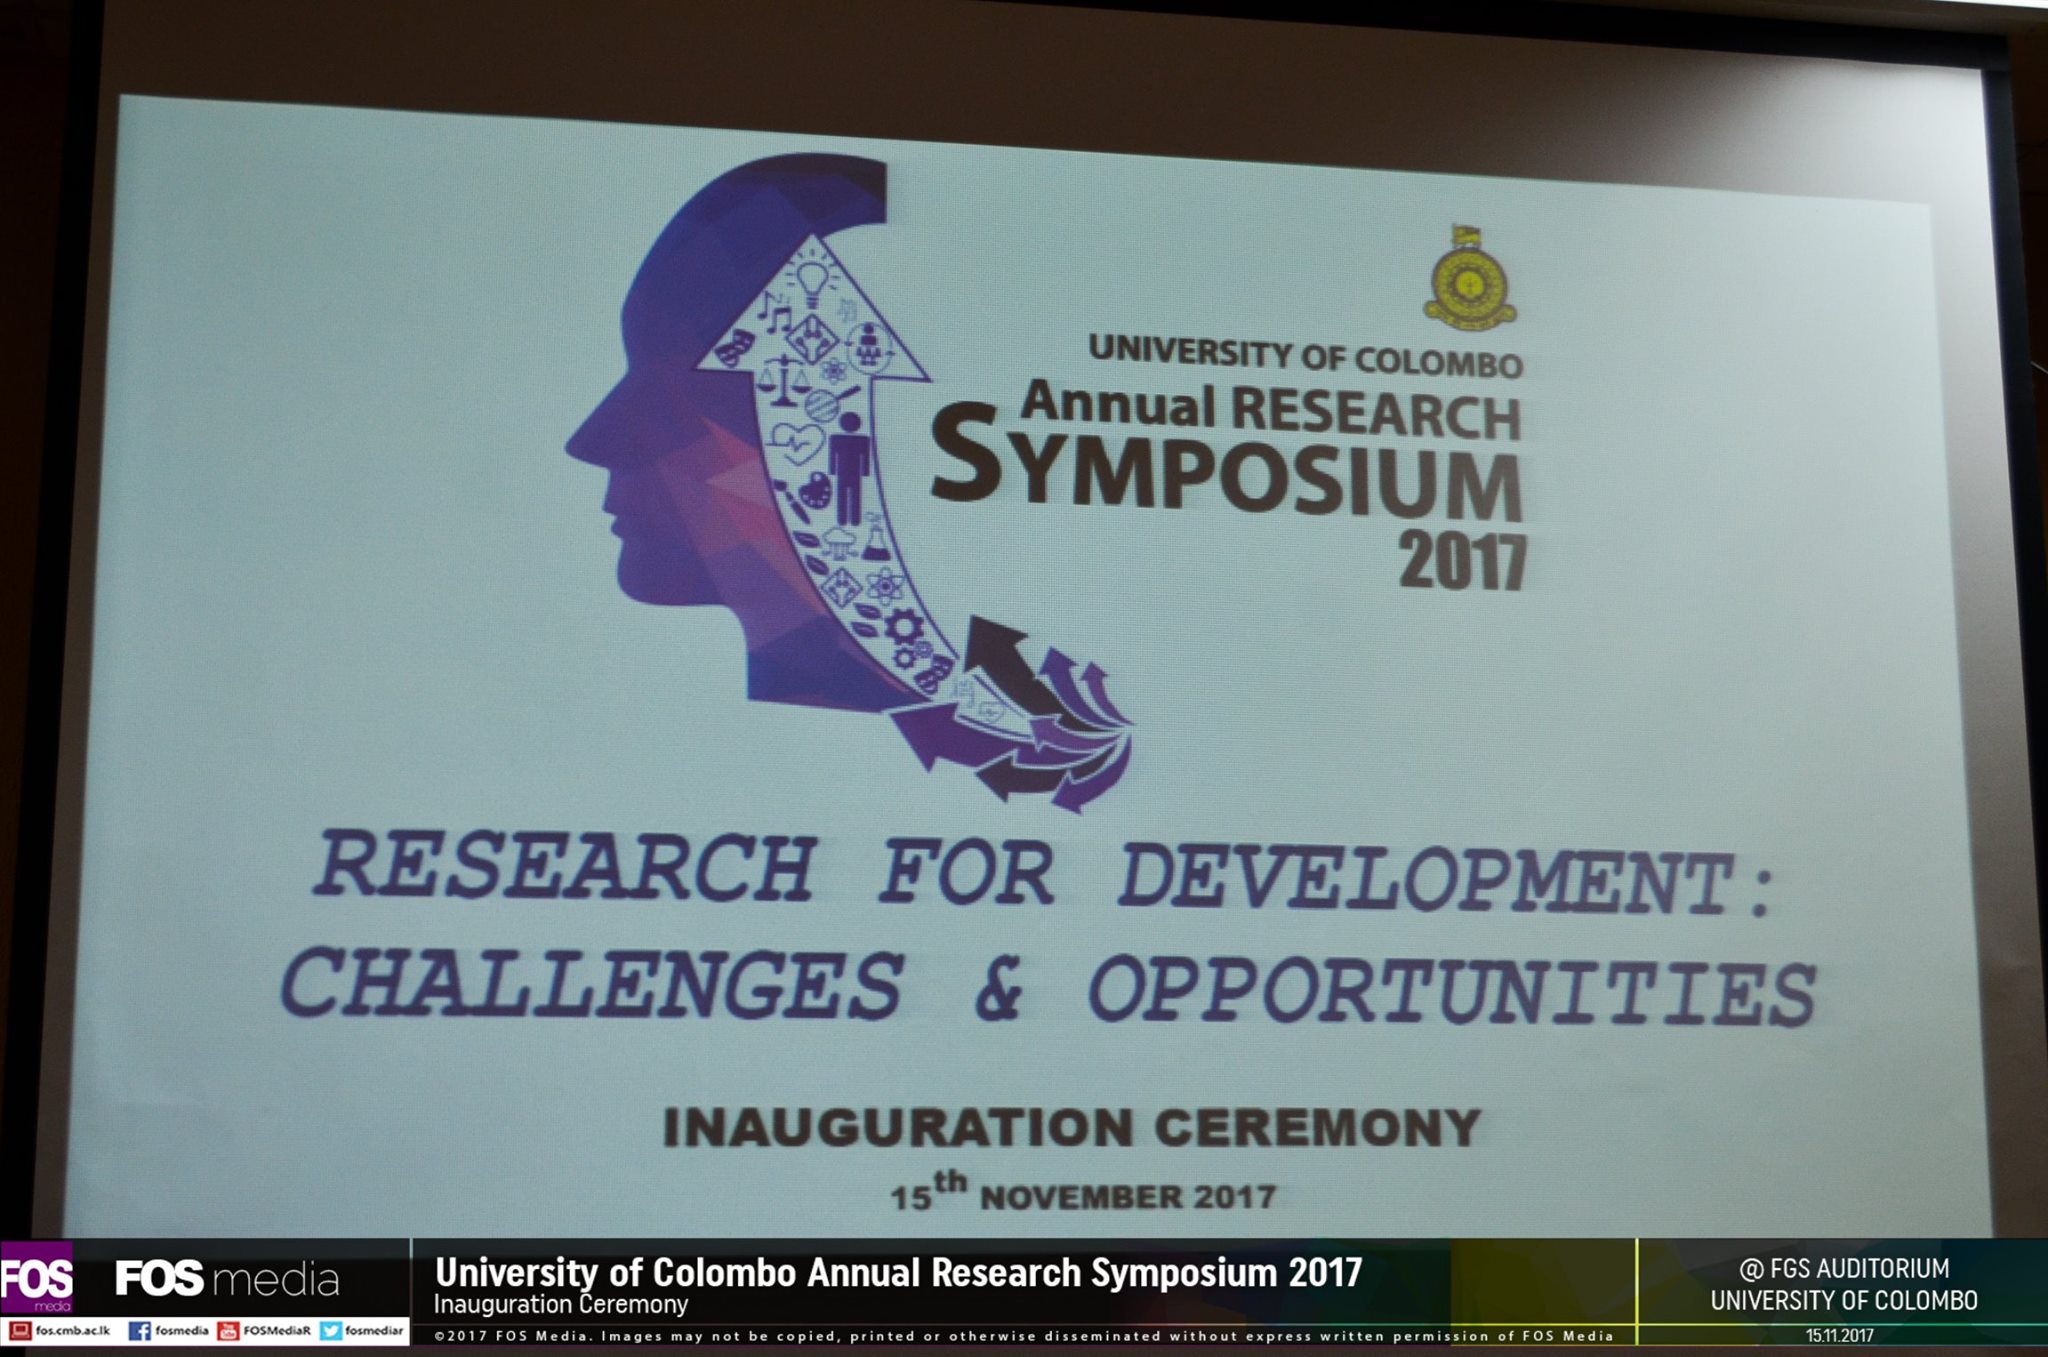 Inauguration Ceremony of the Annual Research Symposium 2017